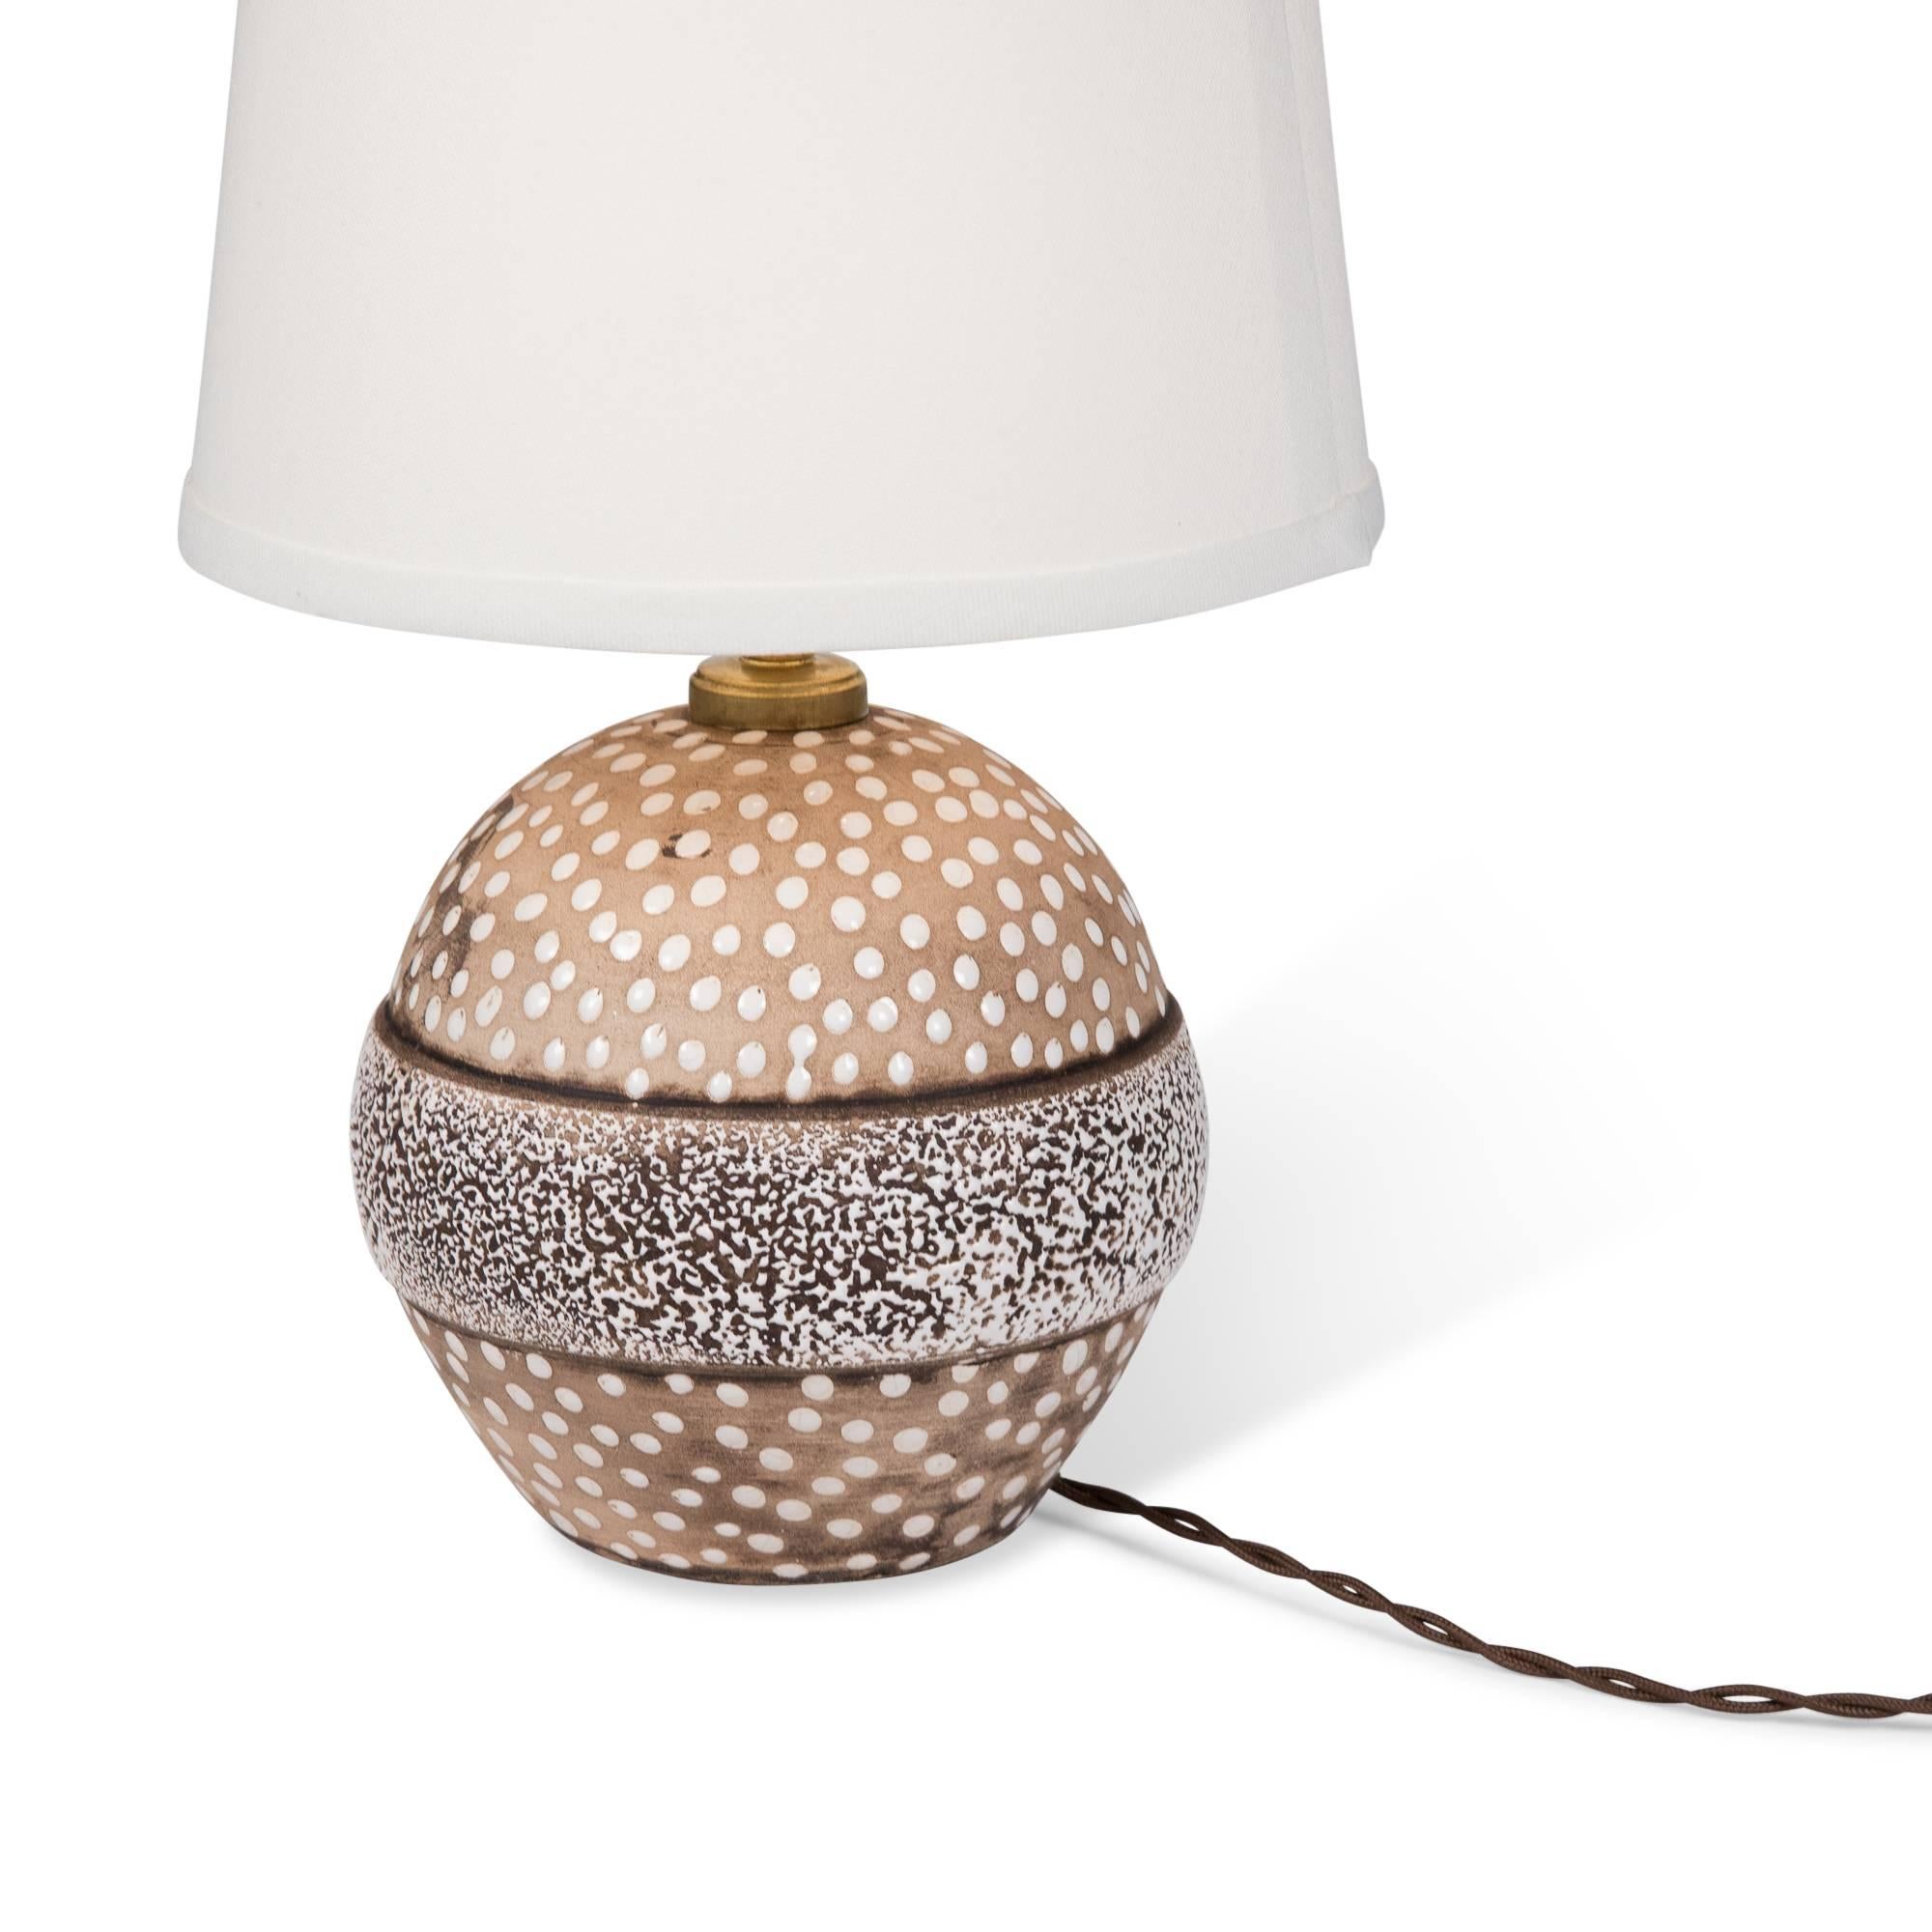 Mid-20th Century Glazed Spotted Ceramic Table Lamp by Louis Dage, French, 1930s For Sale